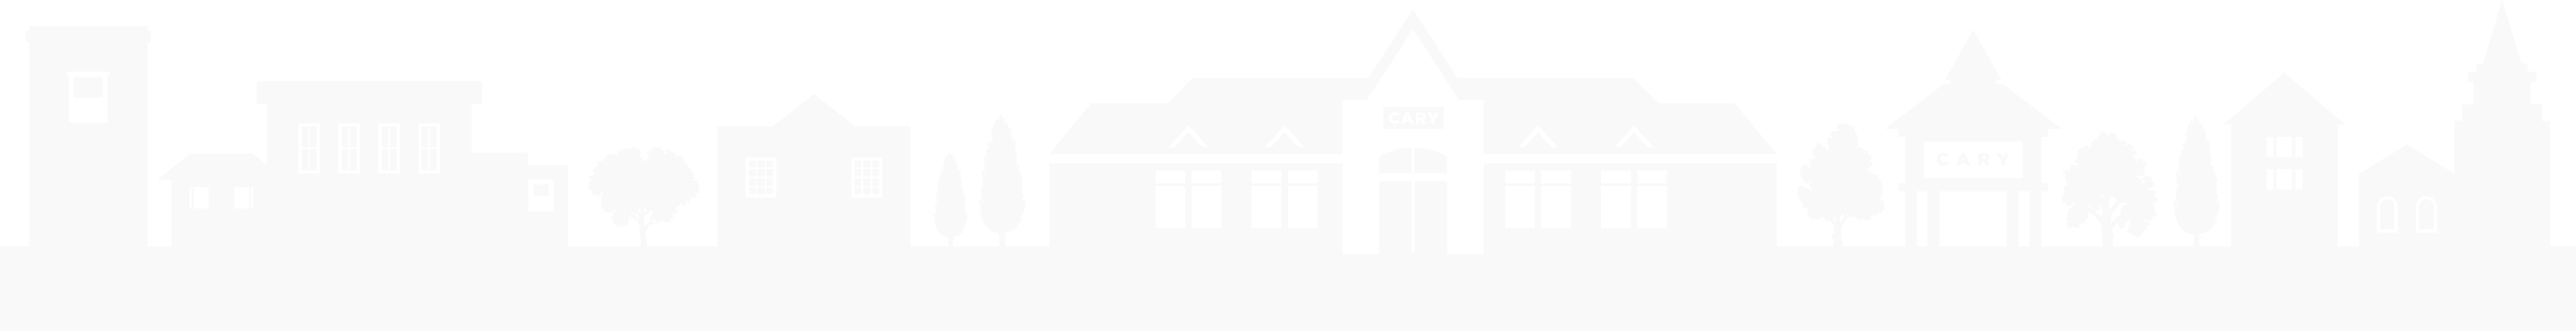 graphic of cary houses lined up